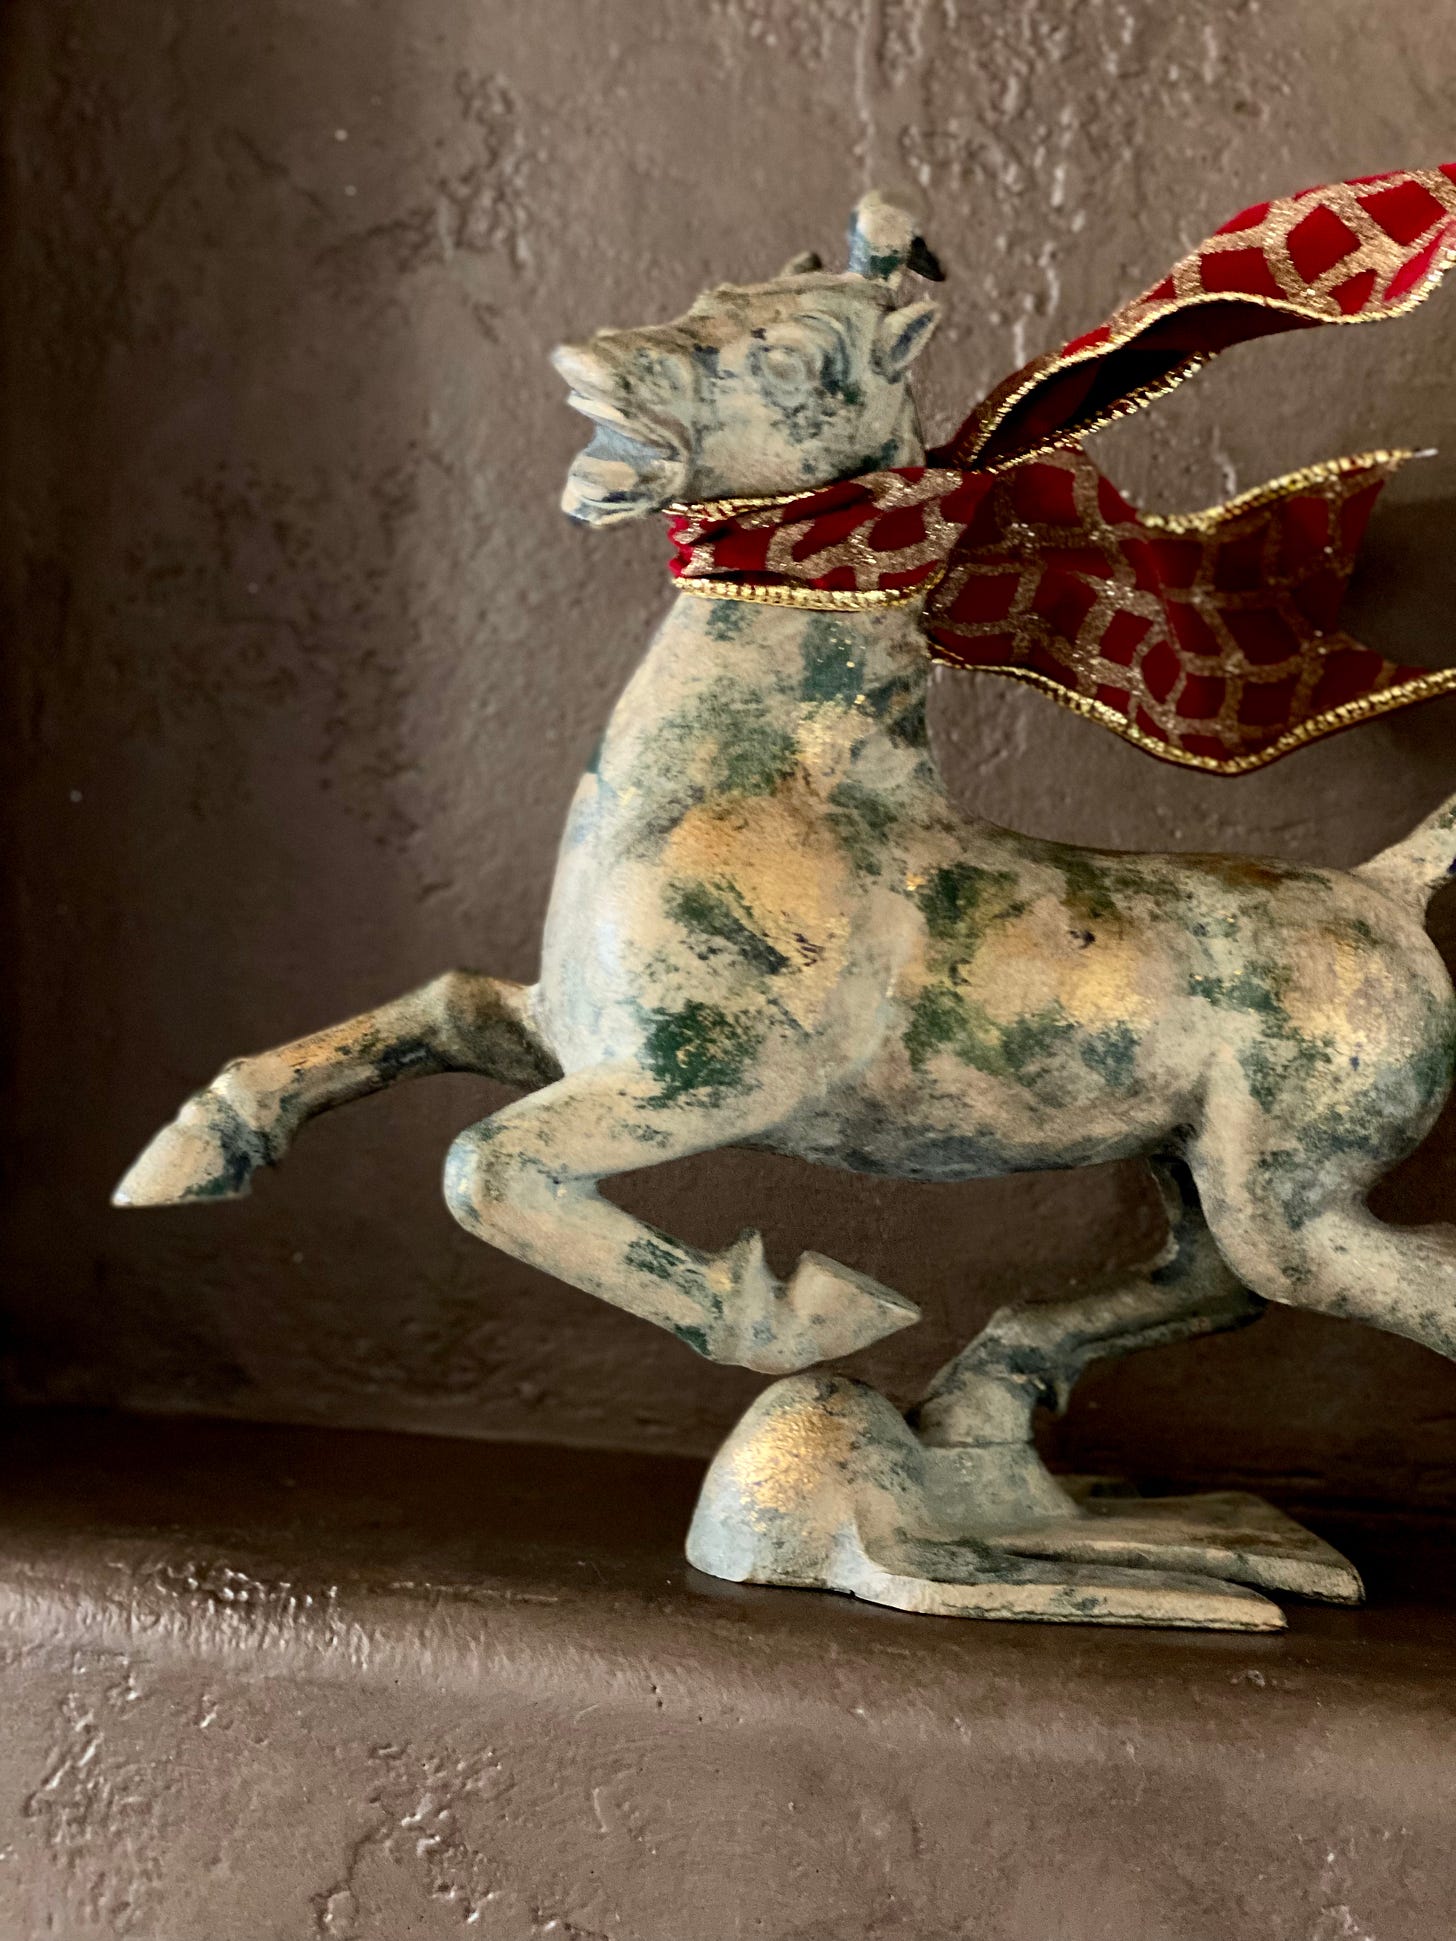 braying japanese cast iron metal horse, patina green, scarf on its neck, ornament, by koreen heaver